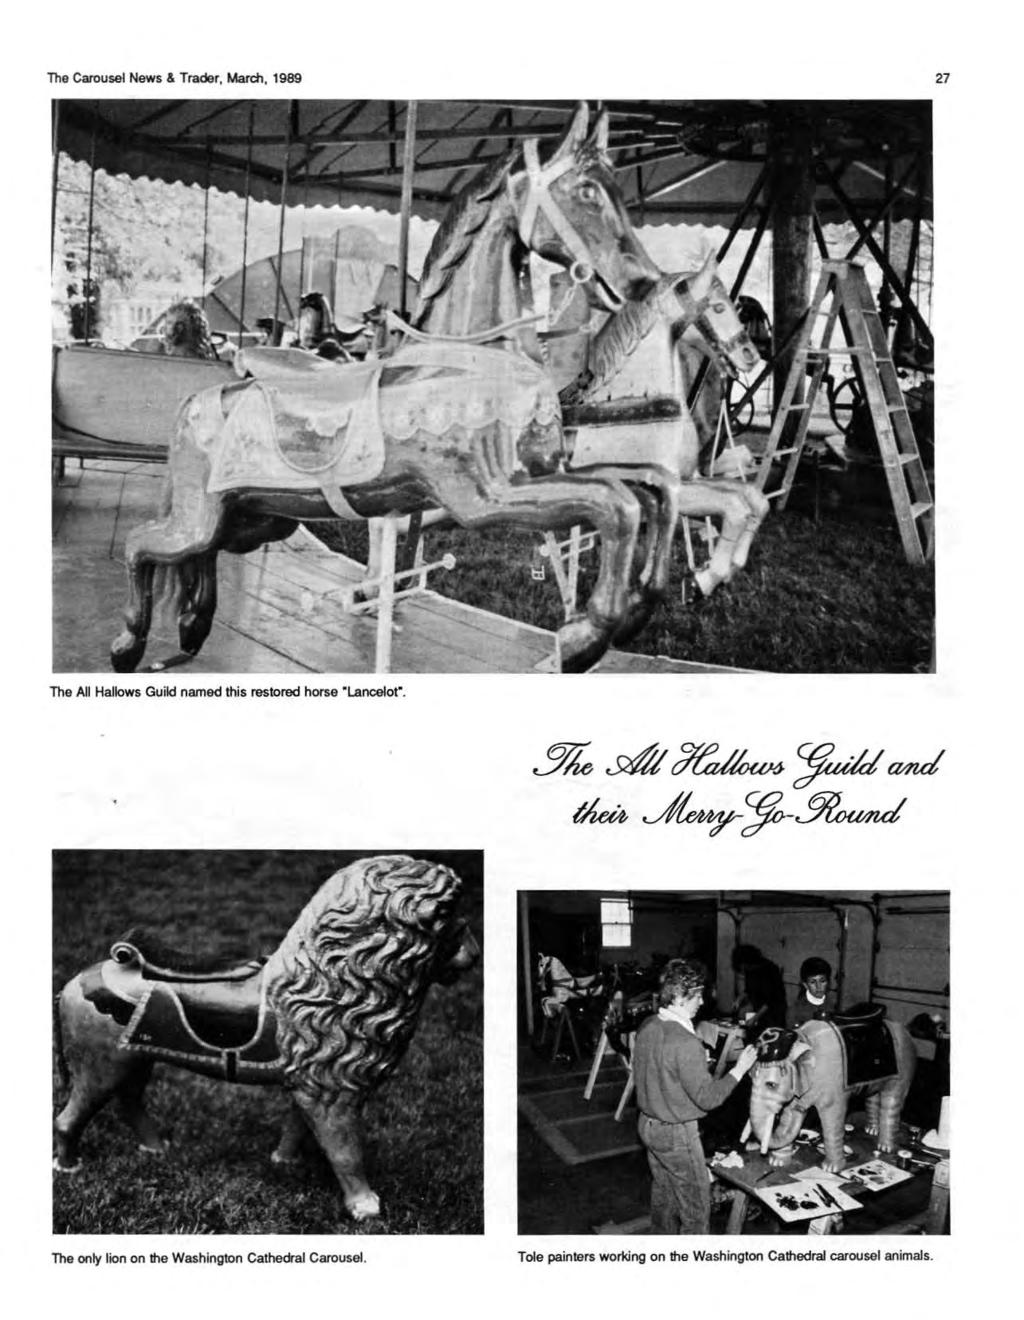 The Carousel News & Trader, March, 1989 27 The All Hallows Guild named this restored horse "Lancelot".